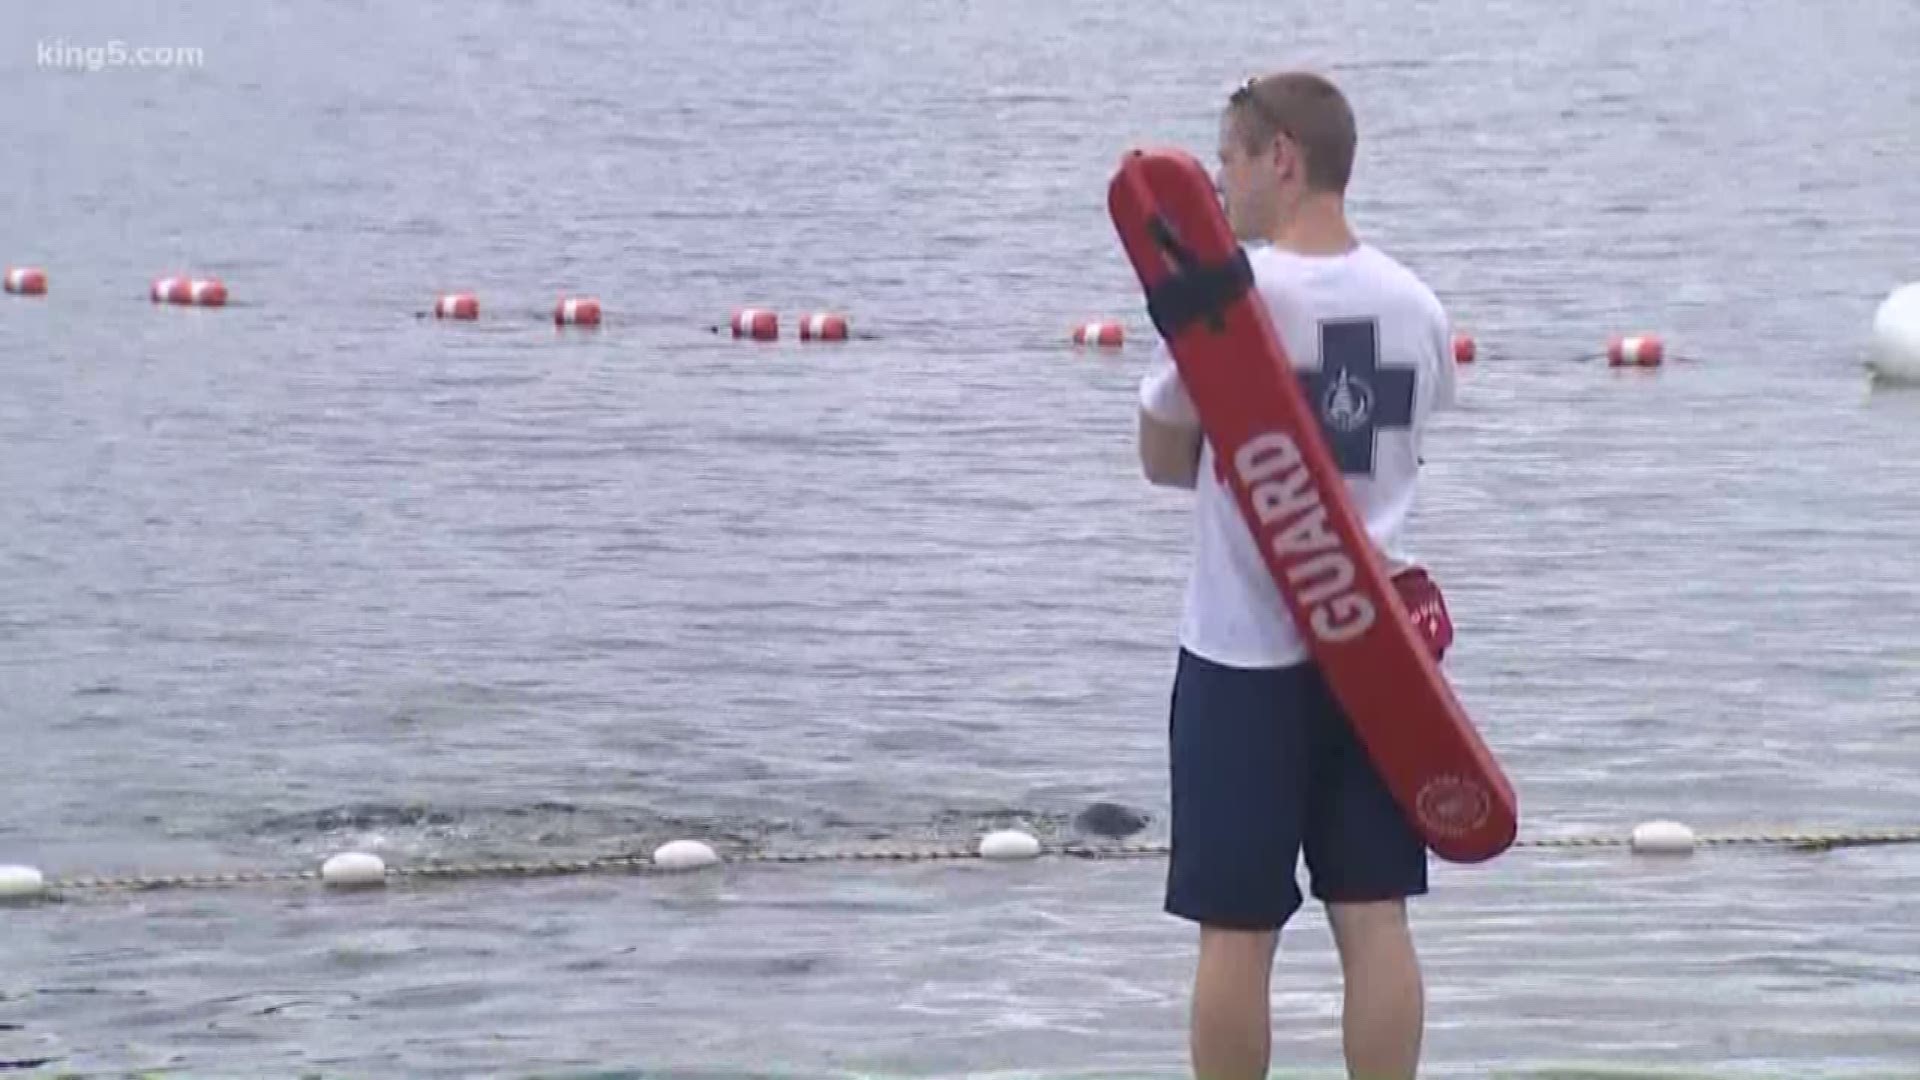 The city of Bellevue is looking to hire 15 more lifeguards so all beaches are properly staffed.